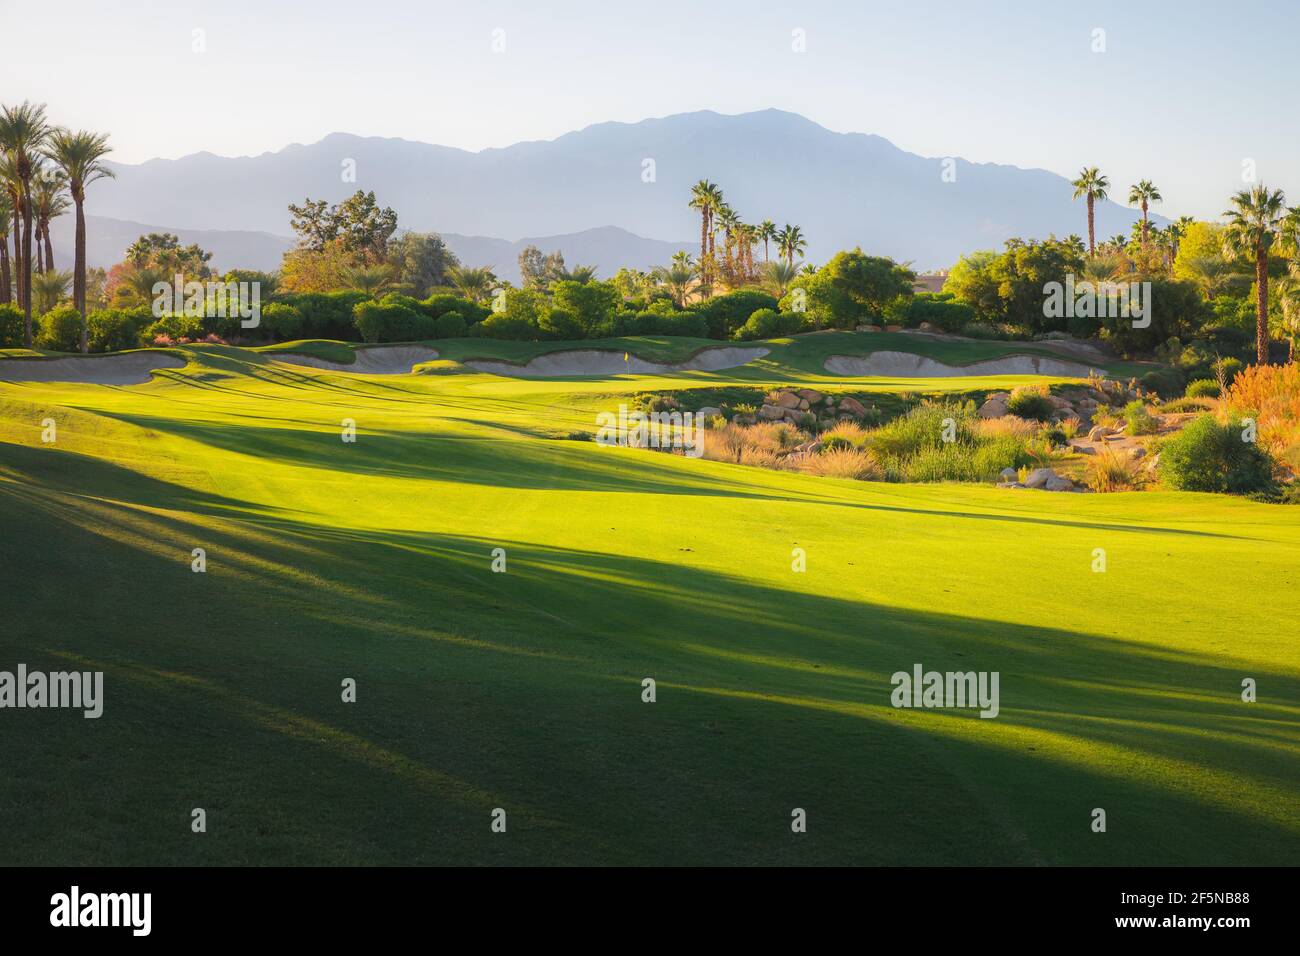 Beautiful golden light over Indian Wells Golf Resort, a desert golf course in Palm Springs, California, USA with view of the San Bernadino Mountains. Stock Photo